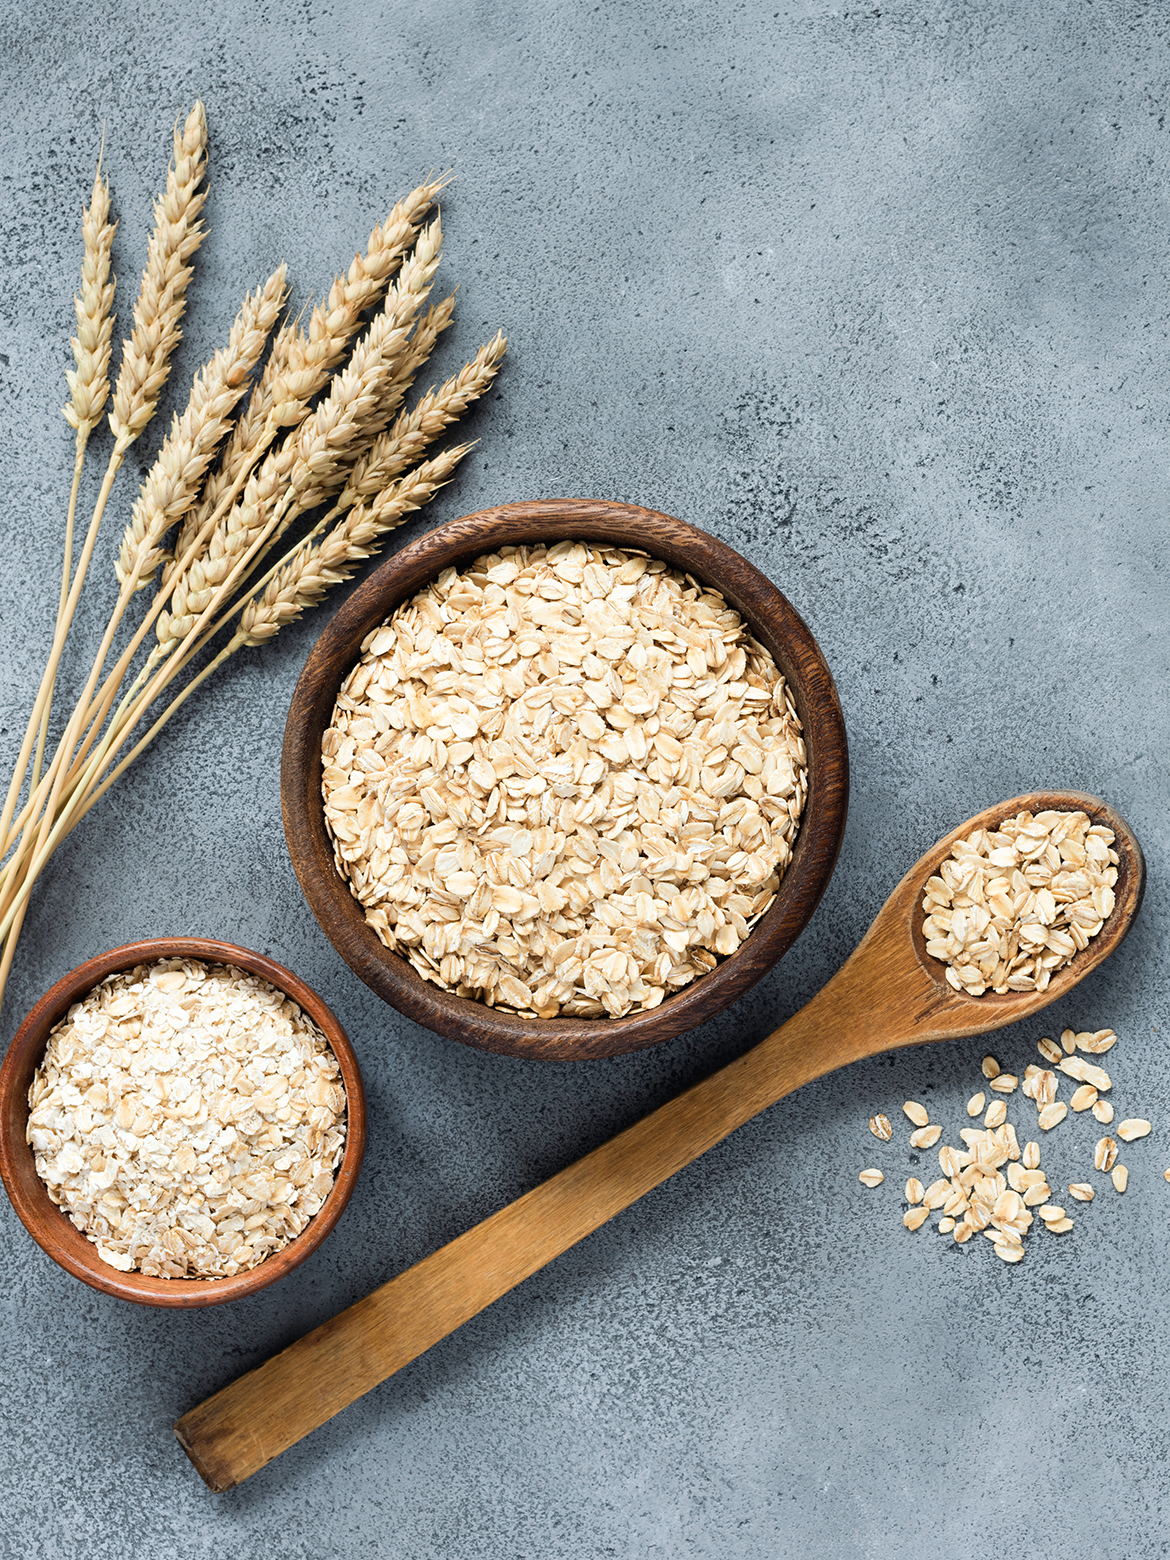 Oats Nutrition Facts and Health Benefits According to a Dietitian